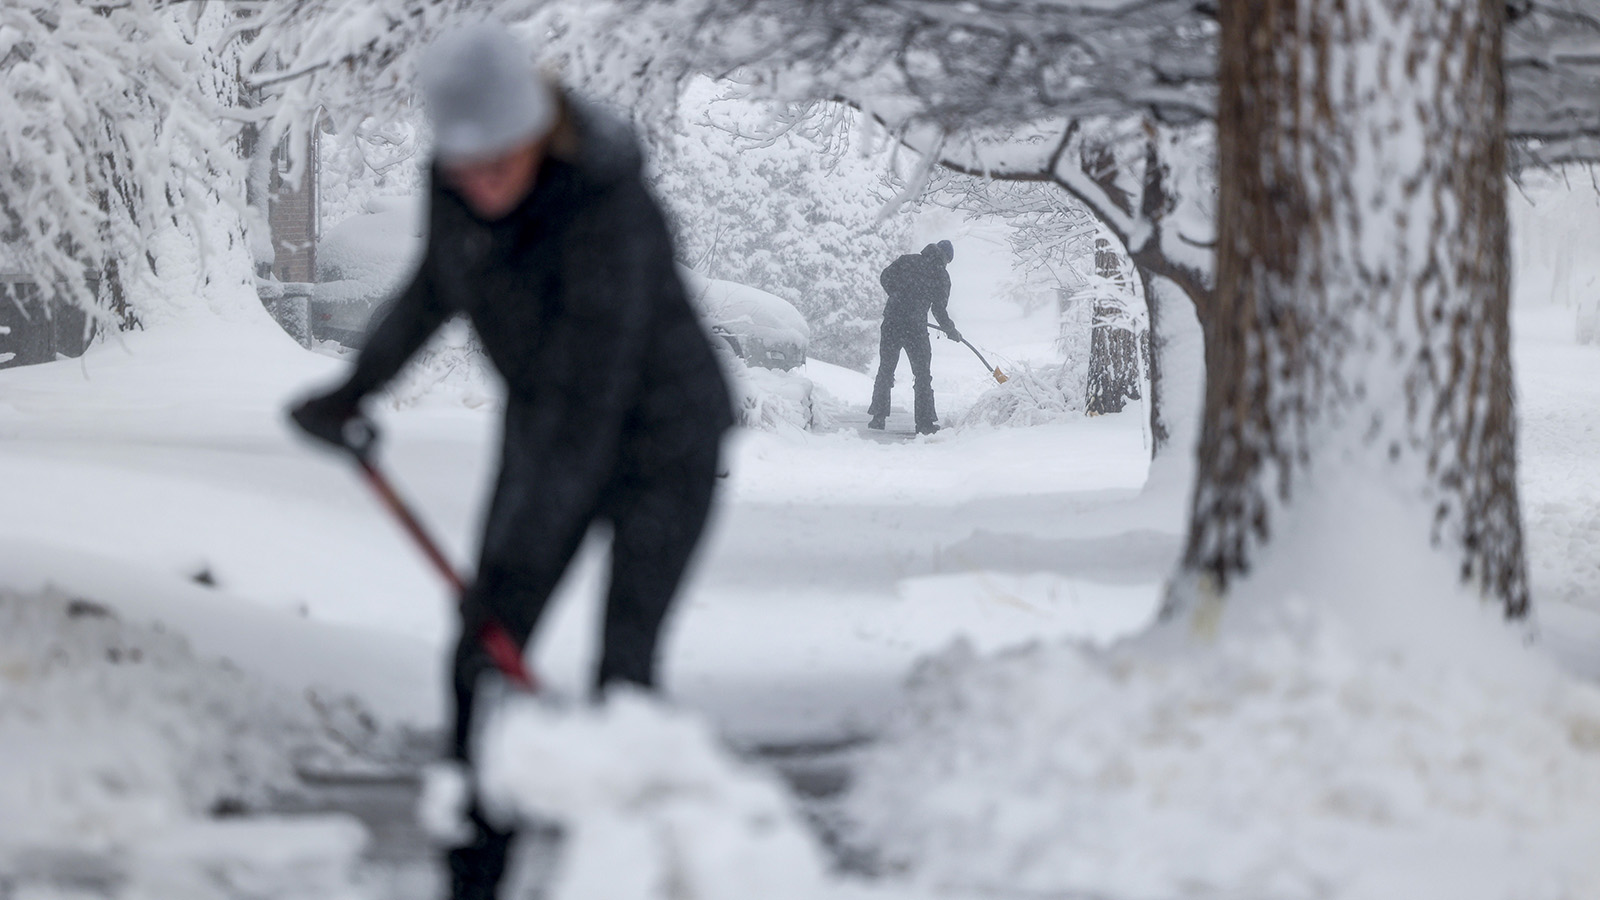 People shovel their sidewalks on March 14, 2021 in Denver, Colorado. More than 1800 flights into and out of Denver have been canceled this weekend and highways around the state have been closed down as a winter storm hits the state.